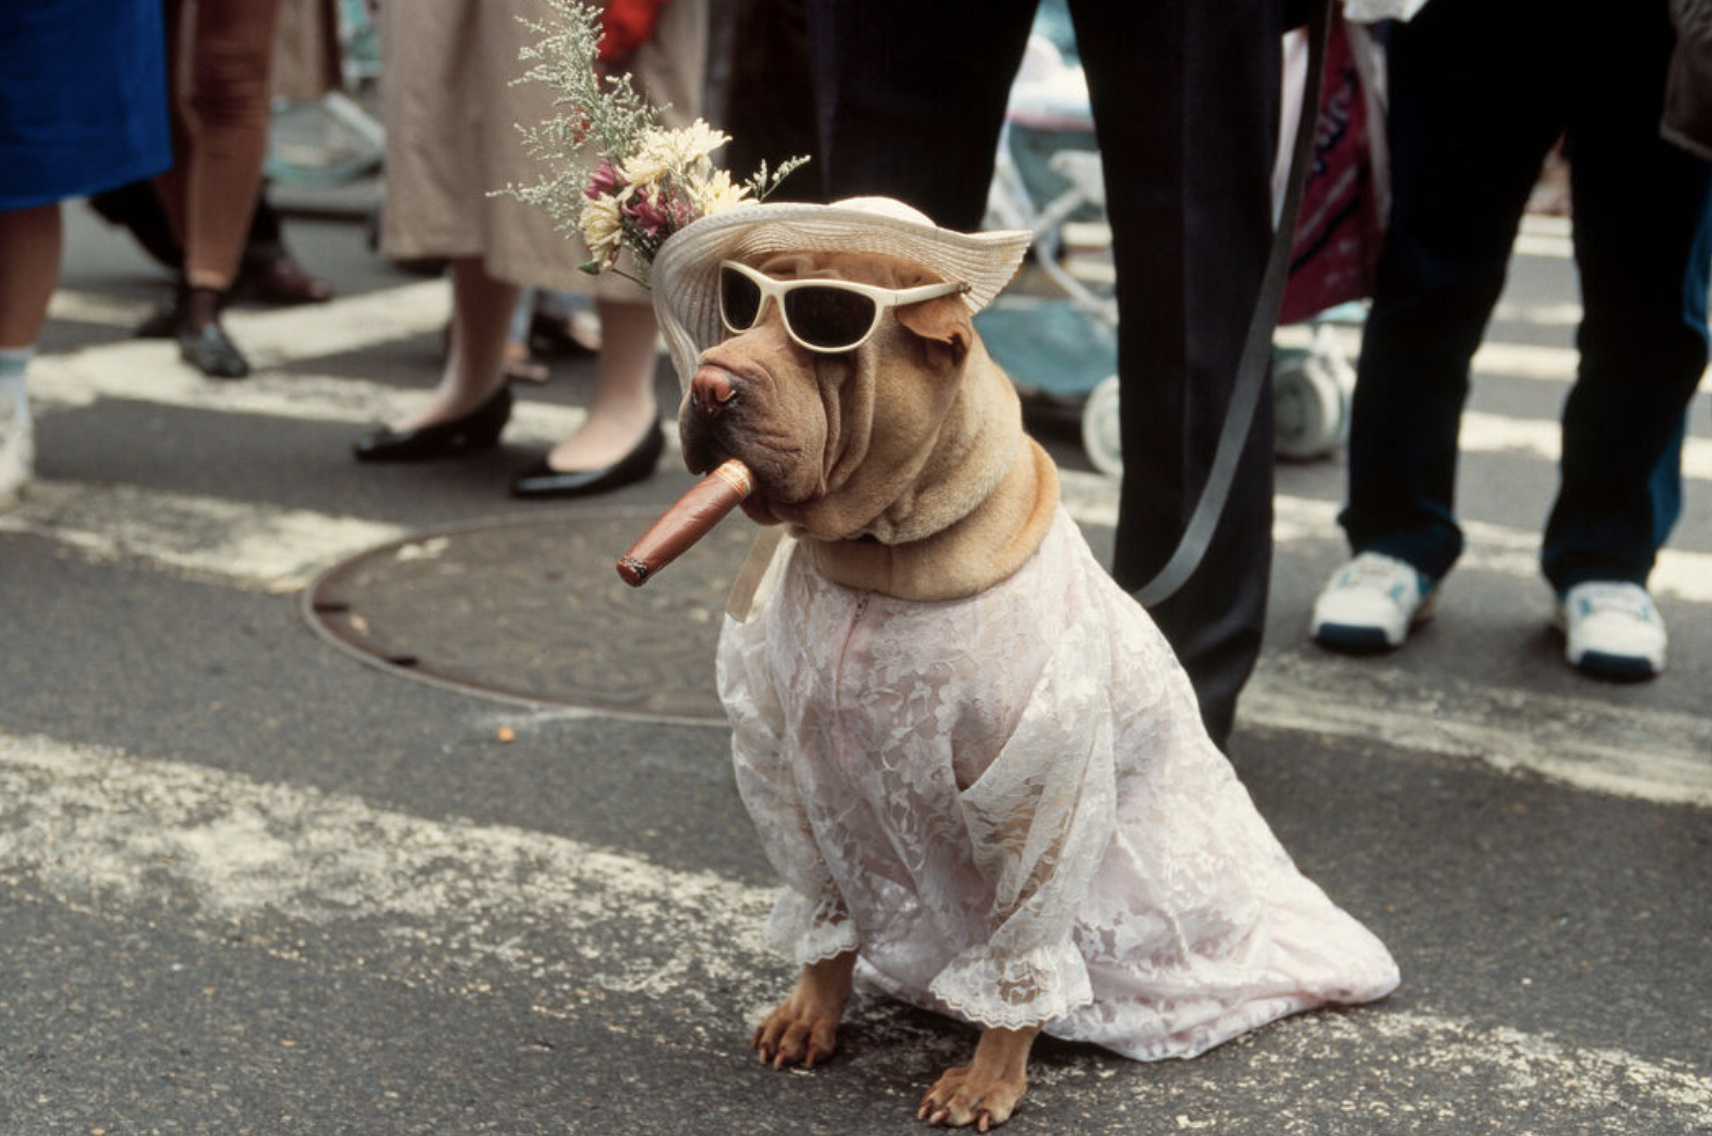 Dog standing in a crosswalk wearing sunglasses, dress and holding a cigar in mouth